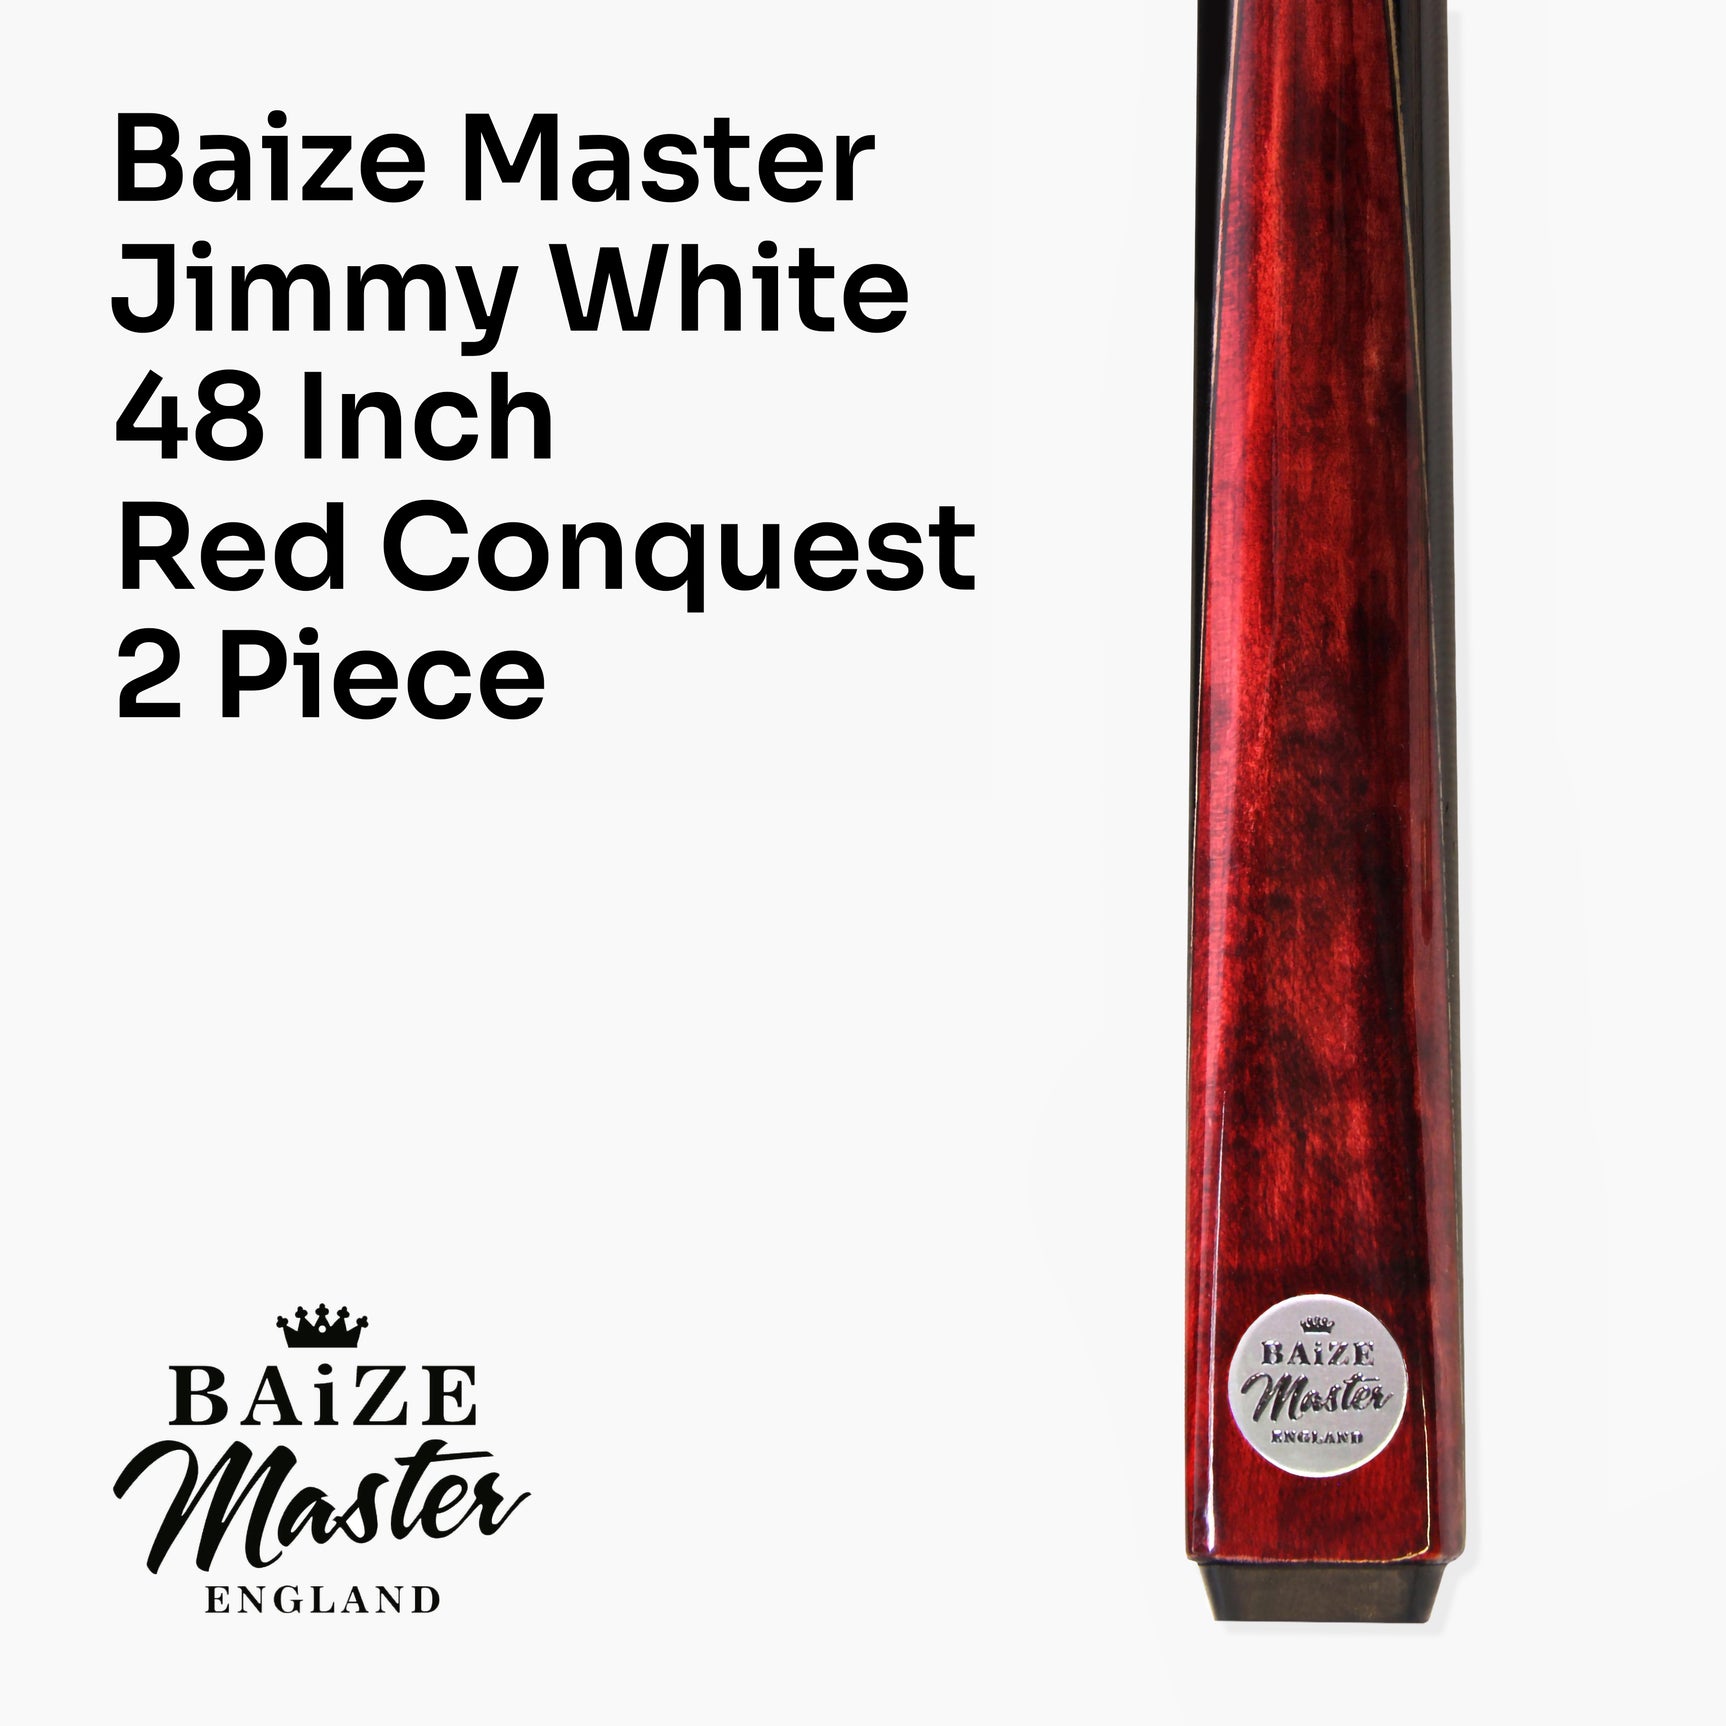 Baize Master JIMMY WHITE Signature CONQUEST 48 Inch 2 Piece Kids Snooker Pool Cue 9.5mm Tip